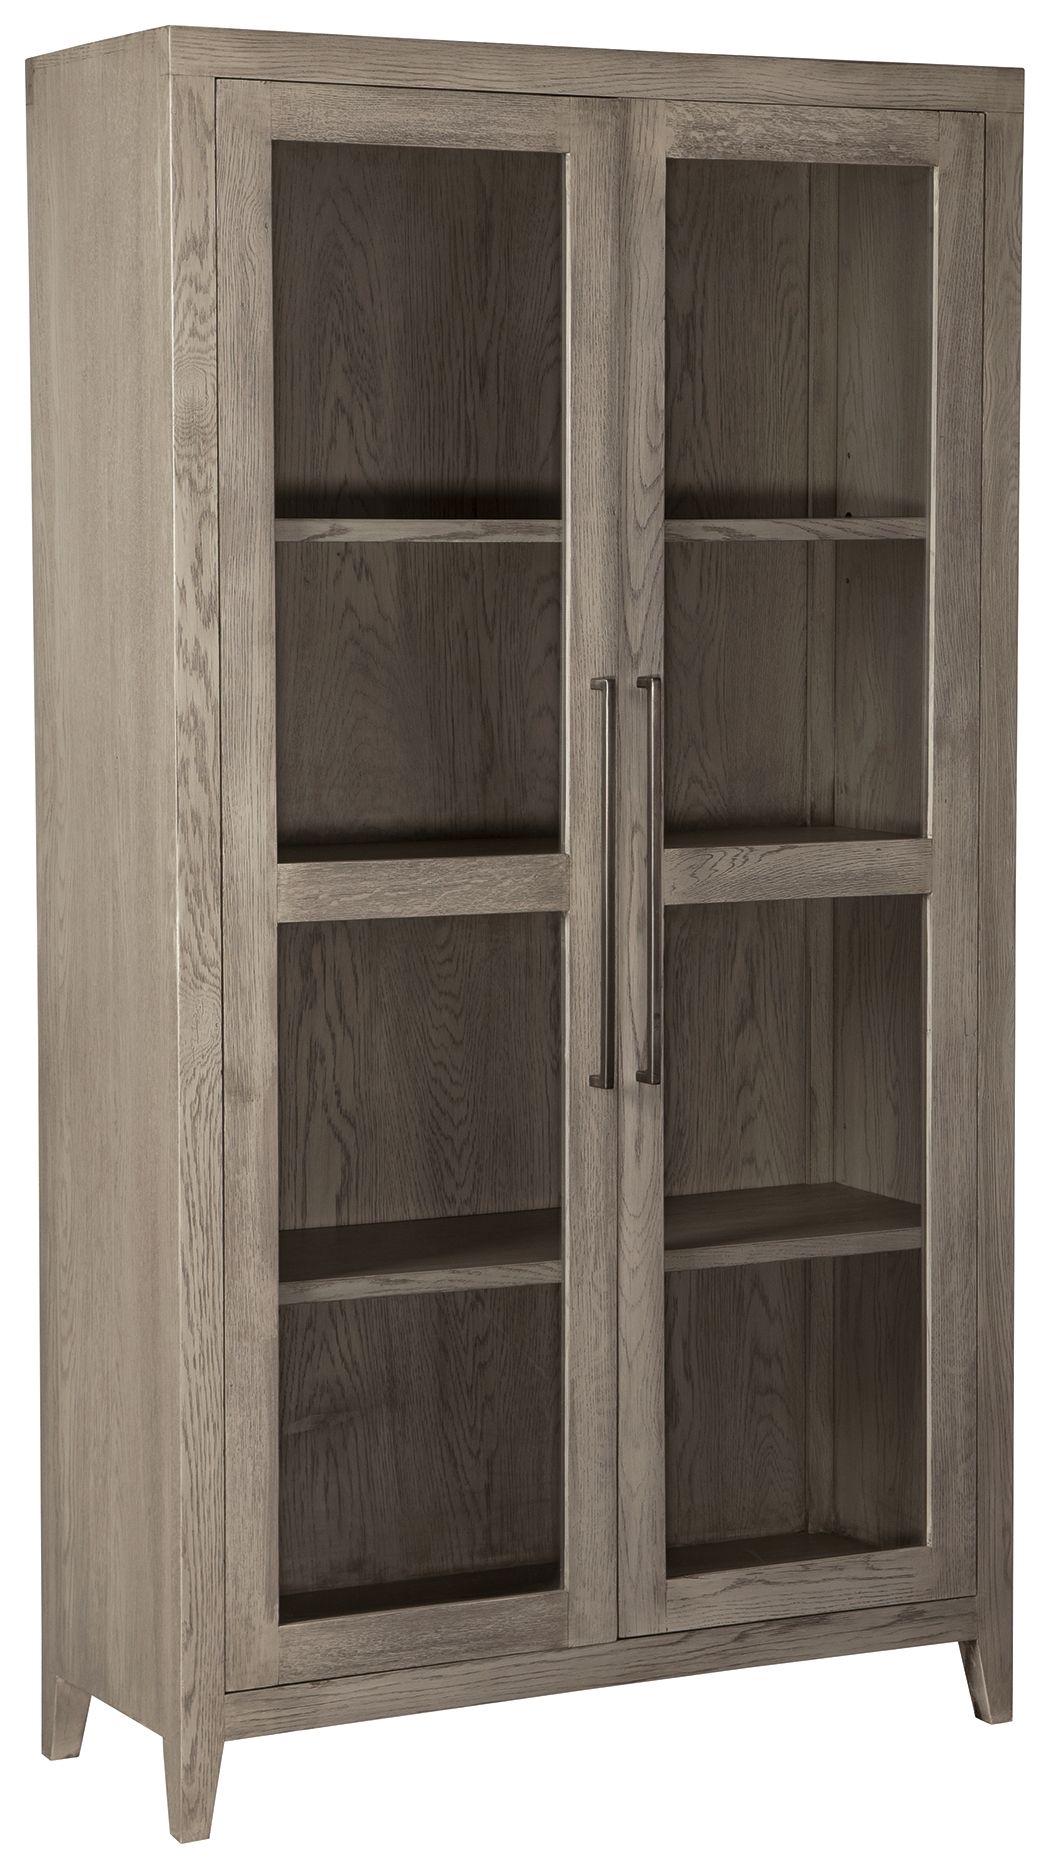 Dalenville - Accent Cabinet - Tony's Home Furnishings